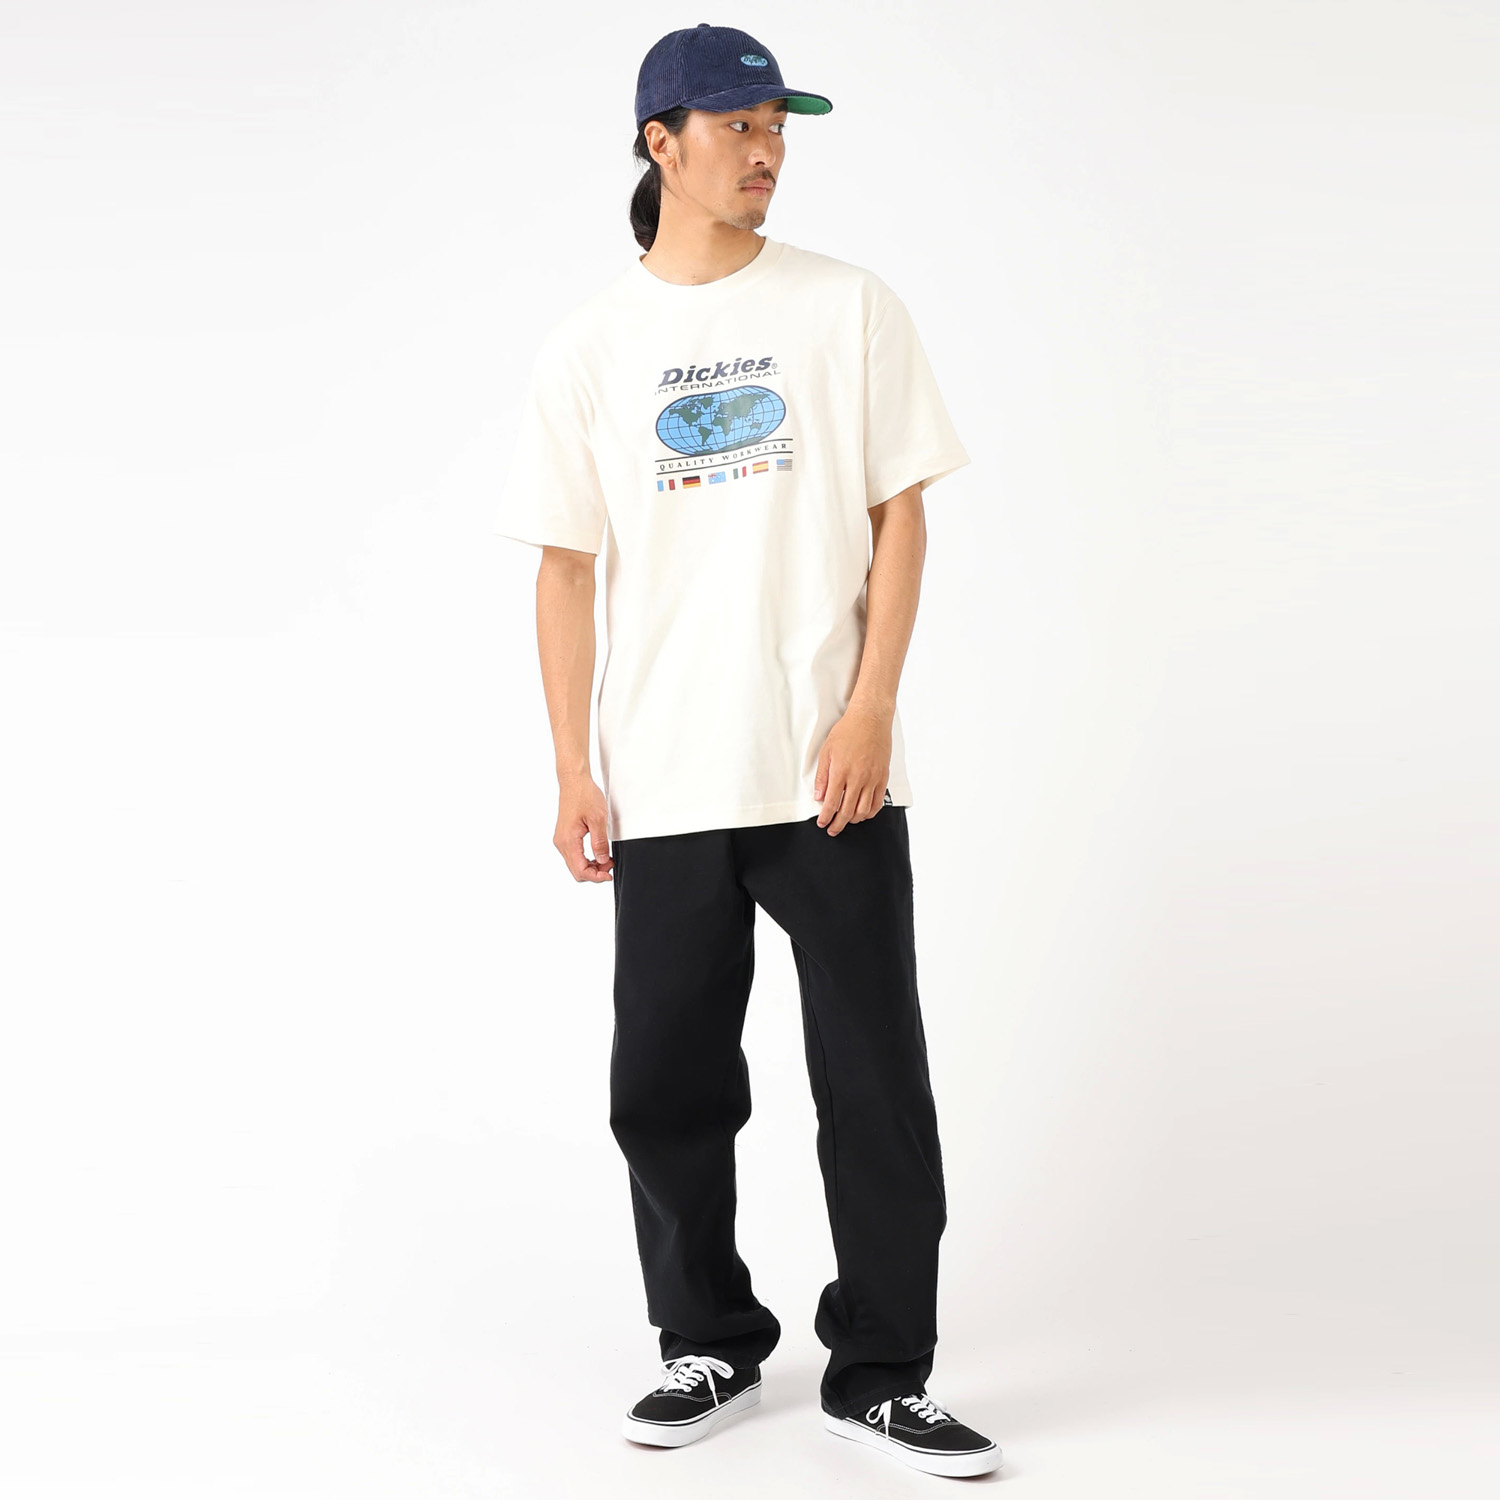 Jake Hayes グラフィック Tシャツ "Dickies Internaional” image number 5